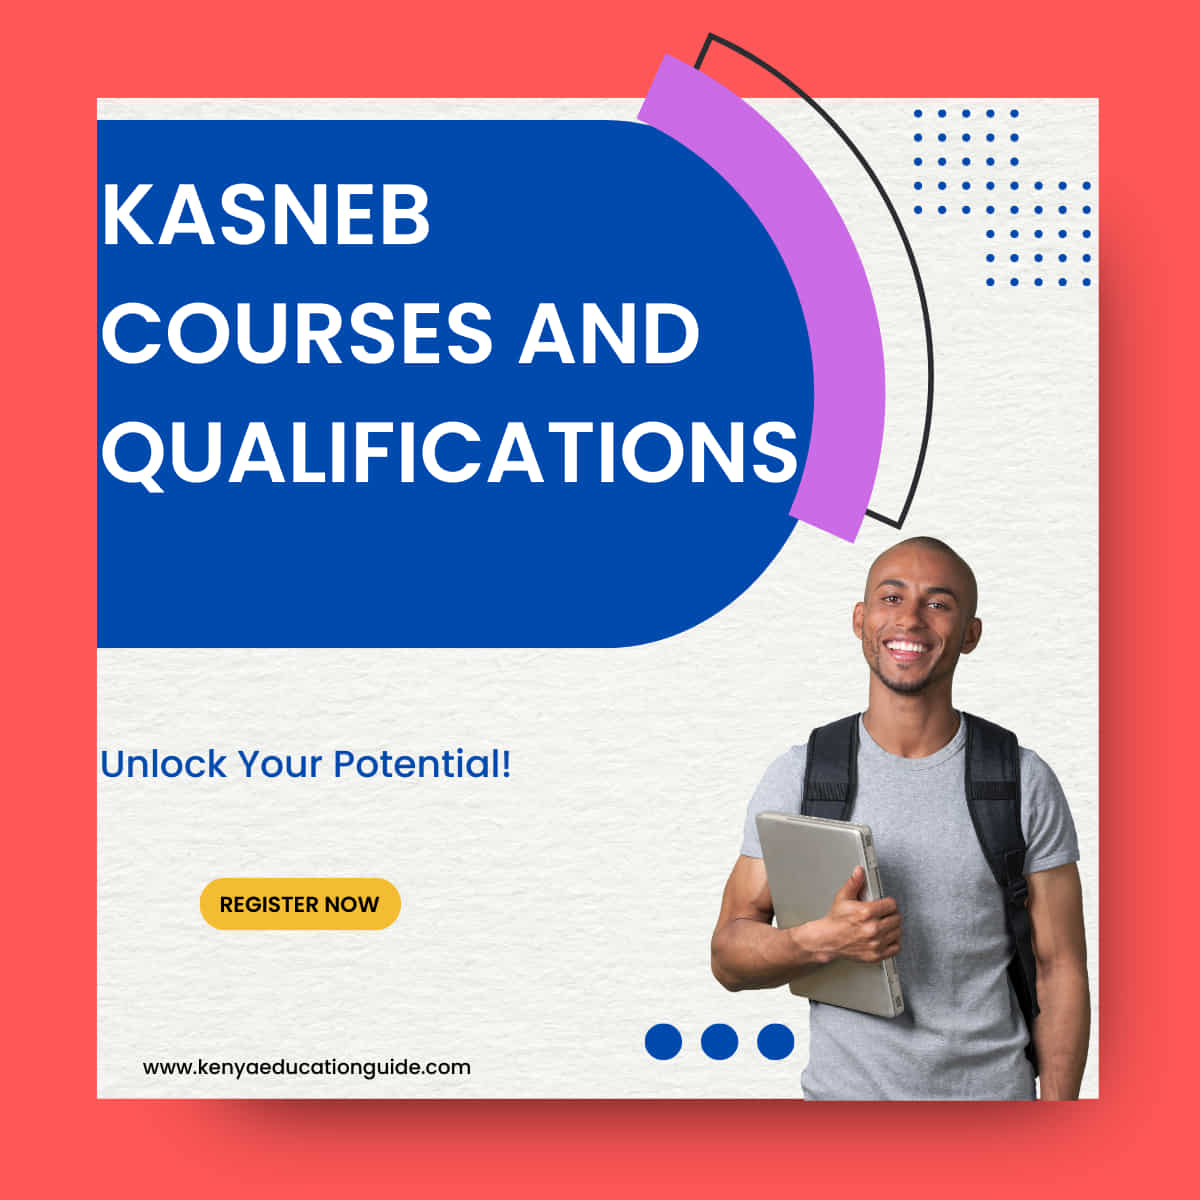 KASNEB courses and qualifications